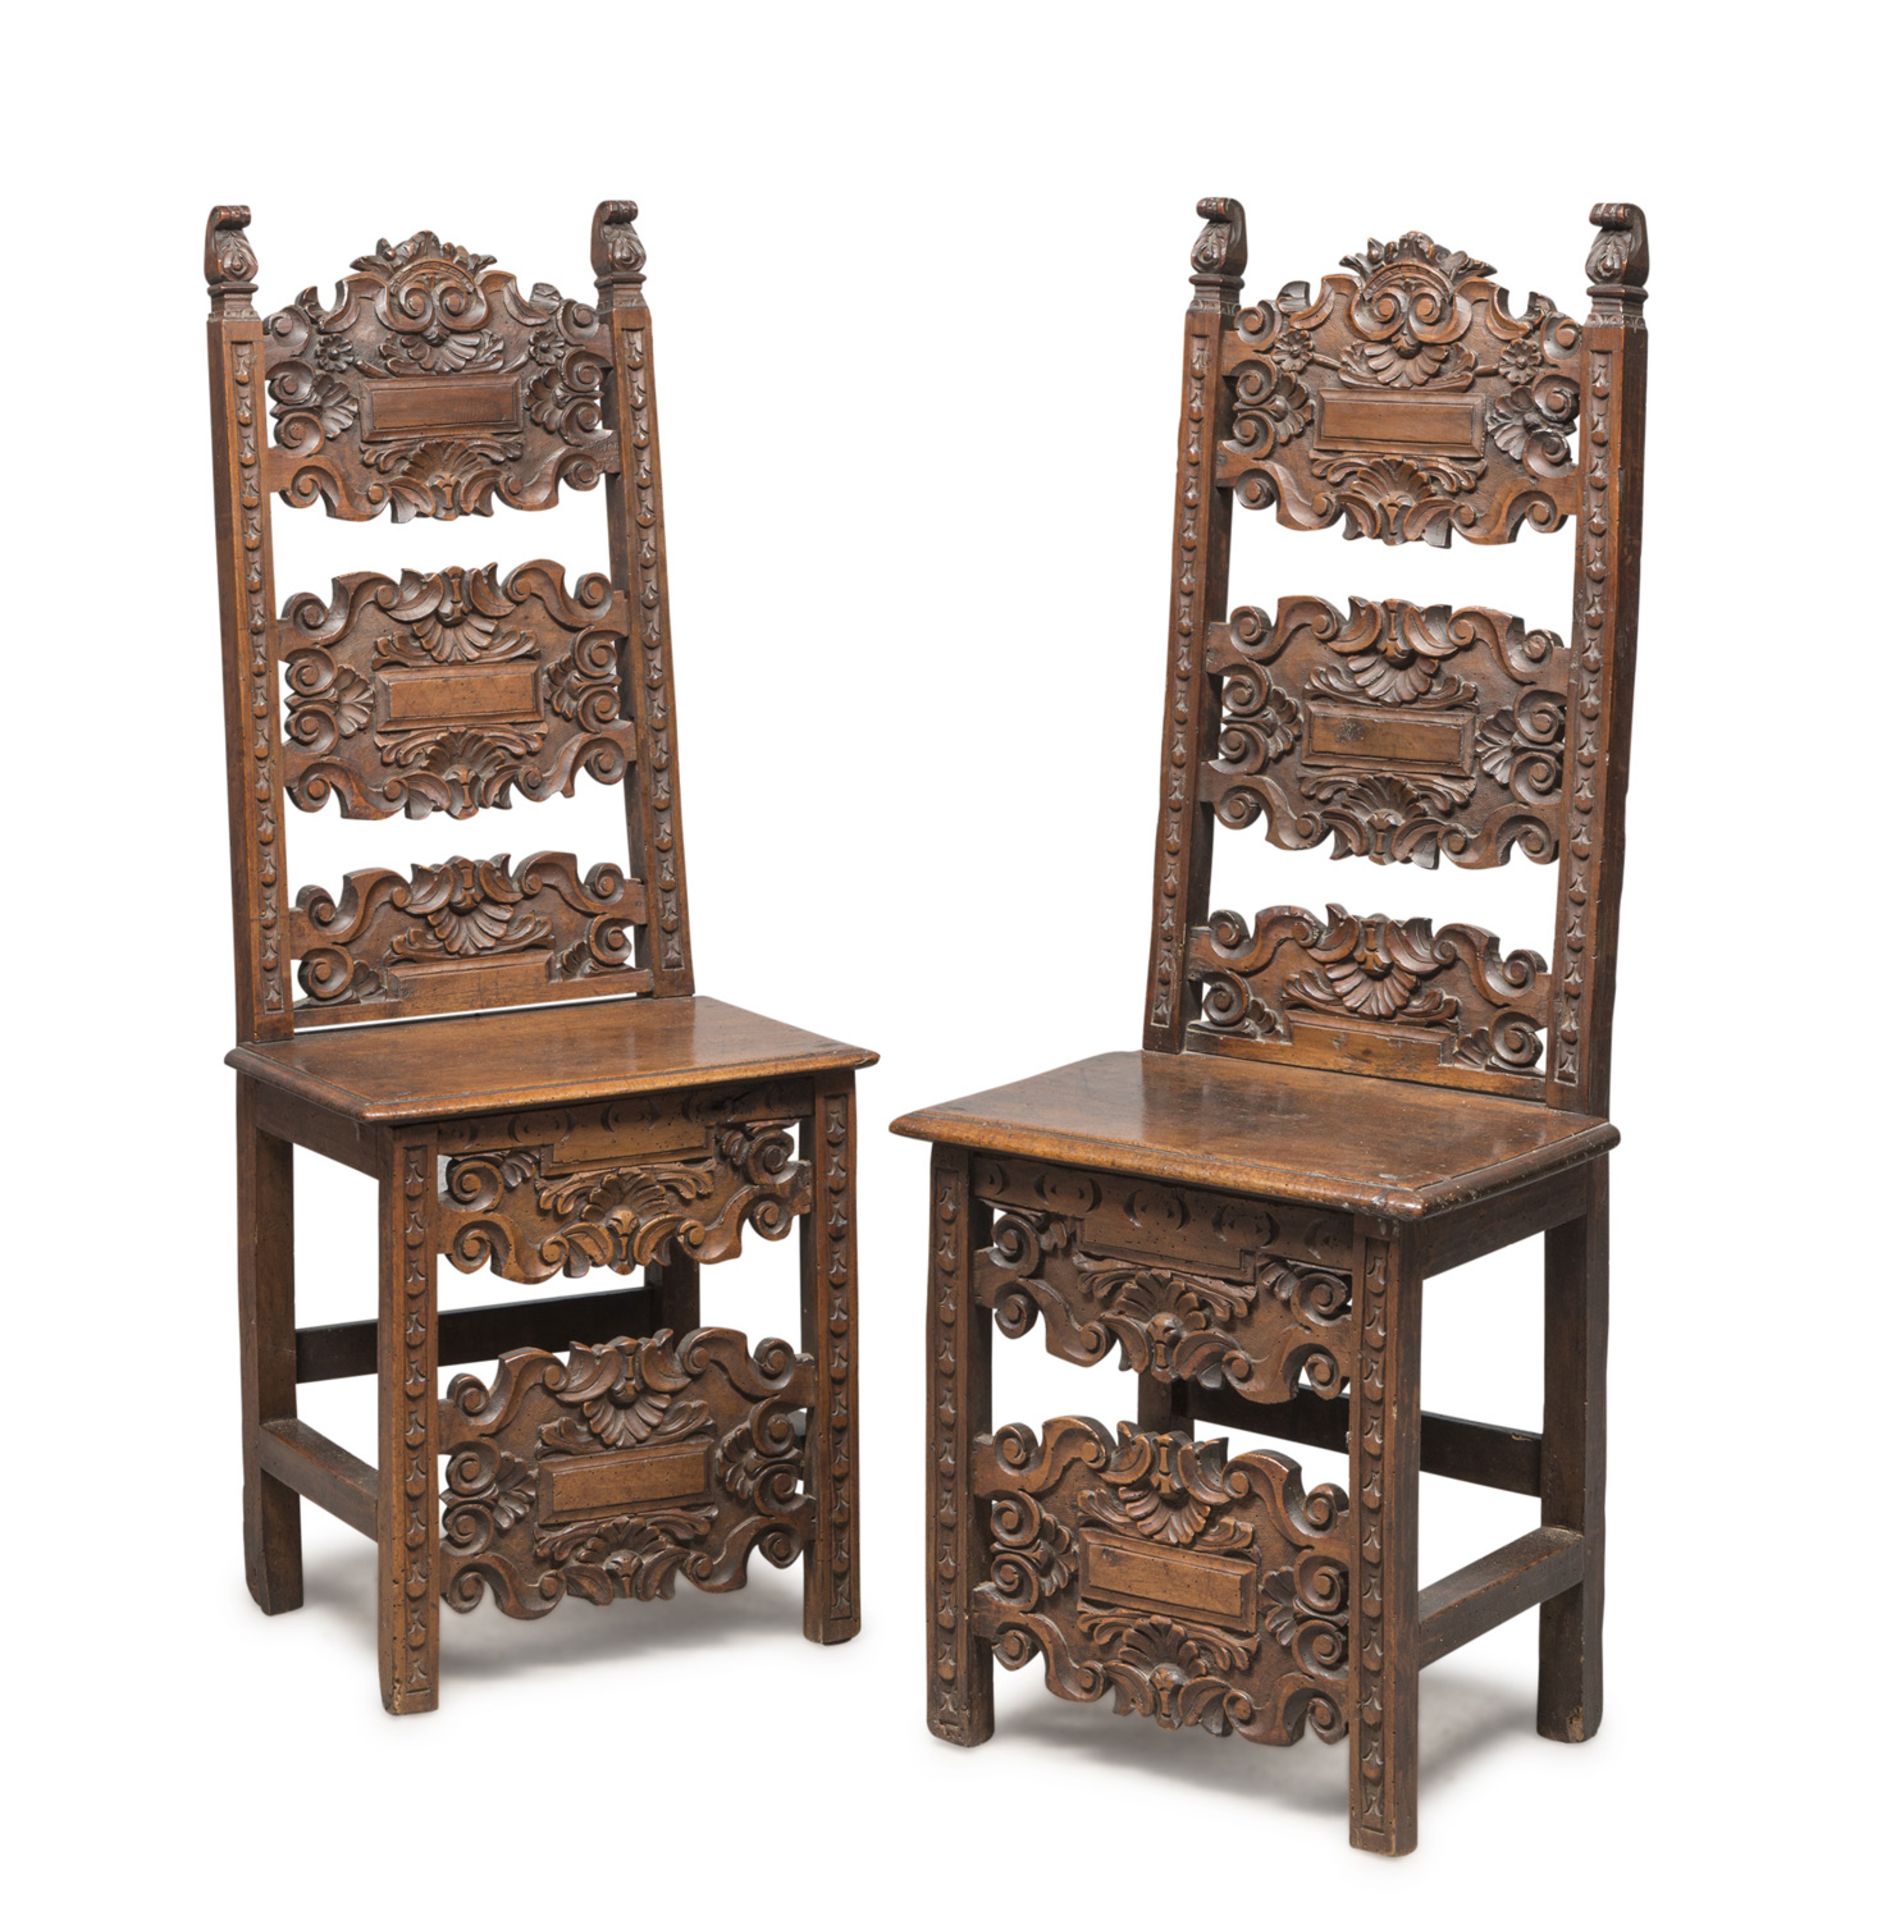 A PAIR OF WALNUT CHAIRS, CENTRAL ITALY, 17TH CENTURY cartouche back carved to floral motifs and